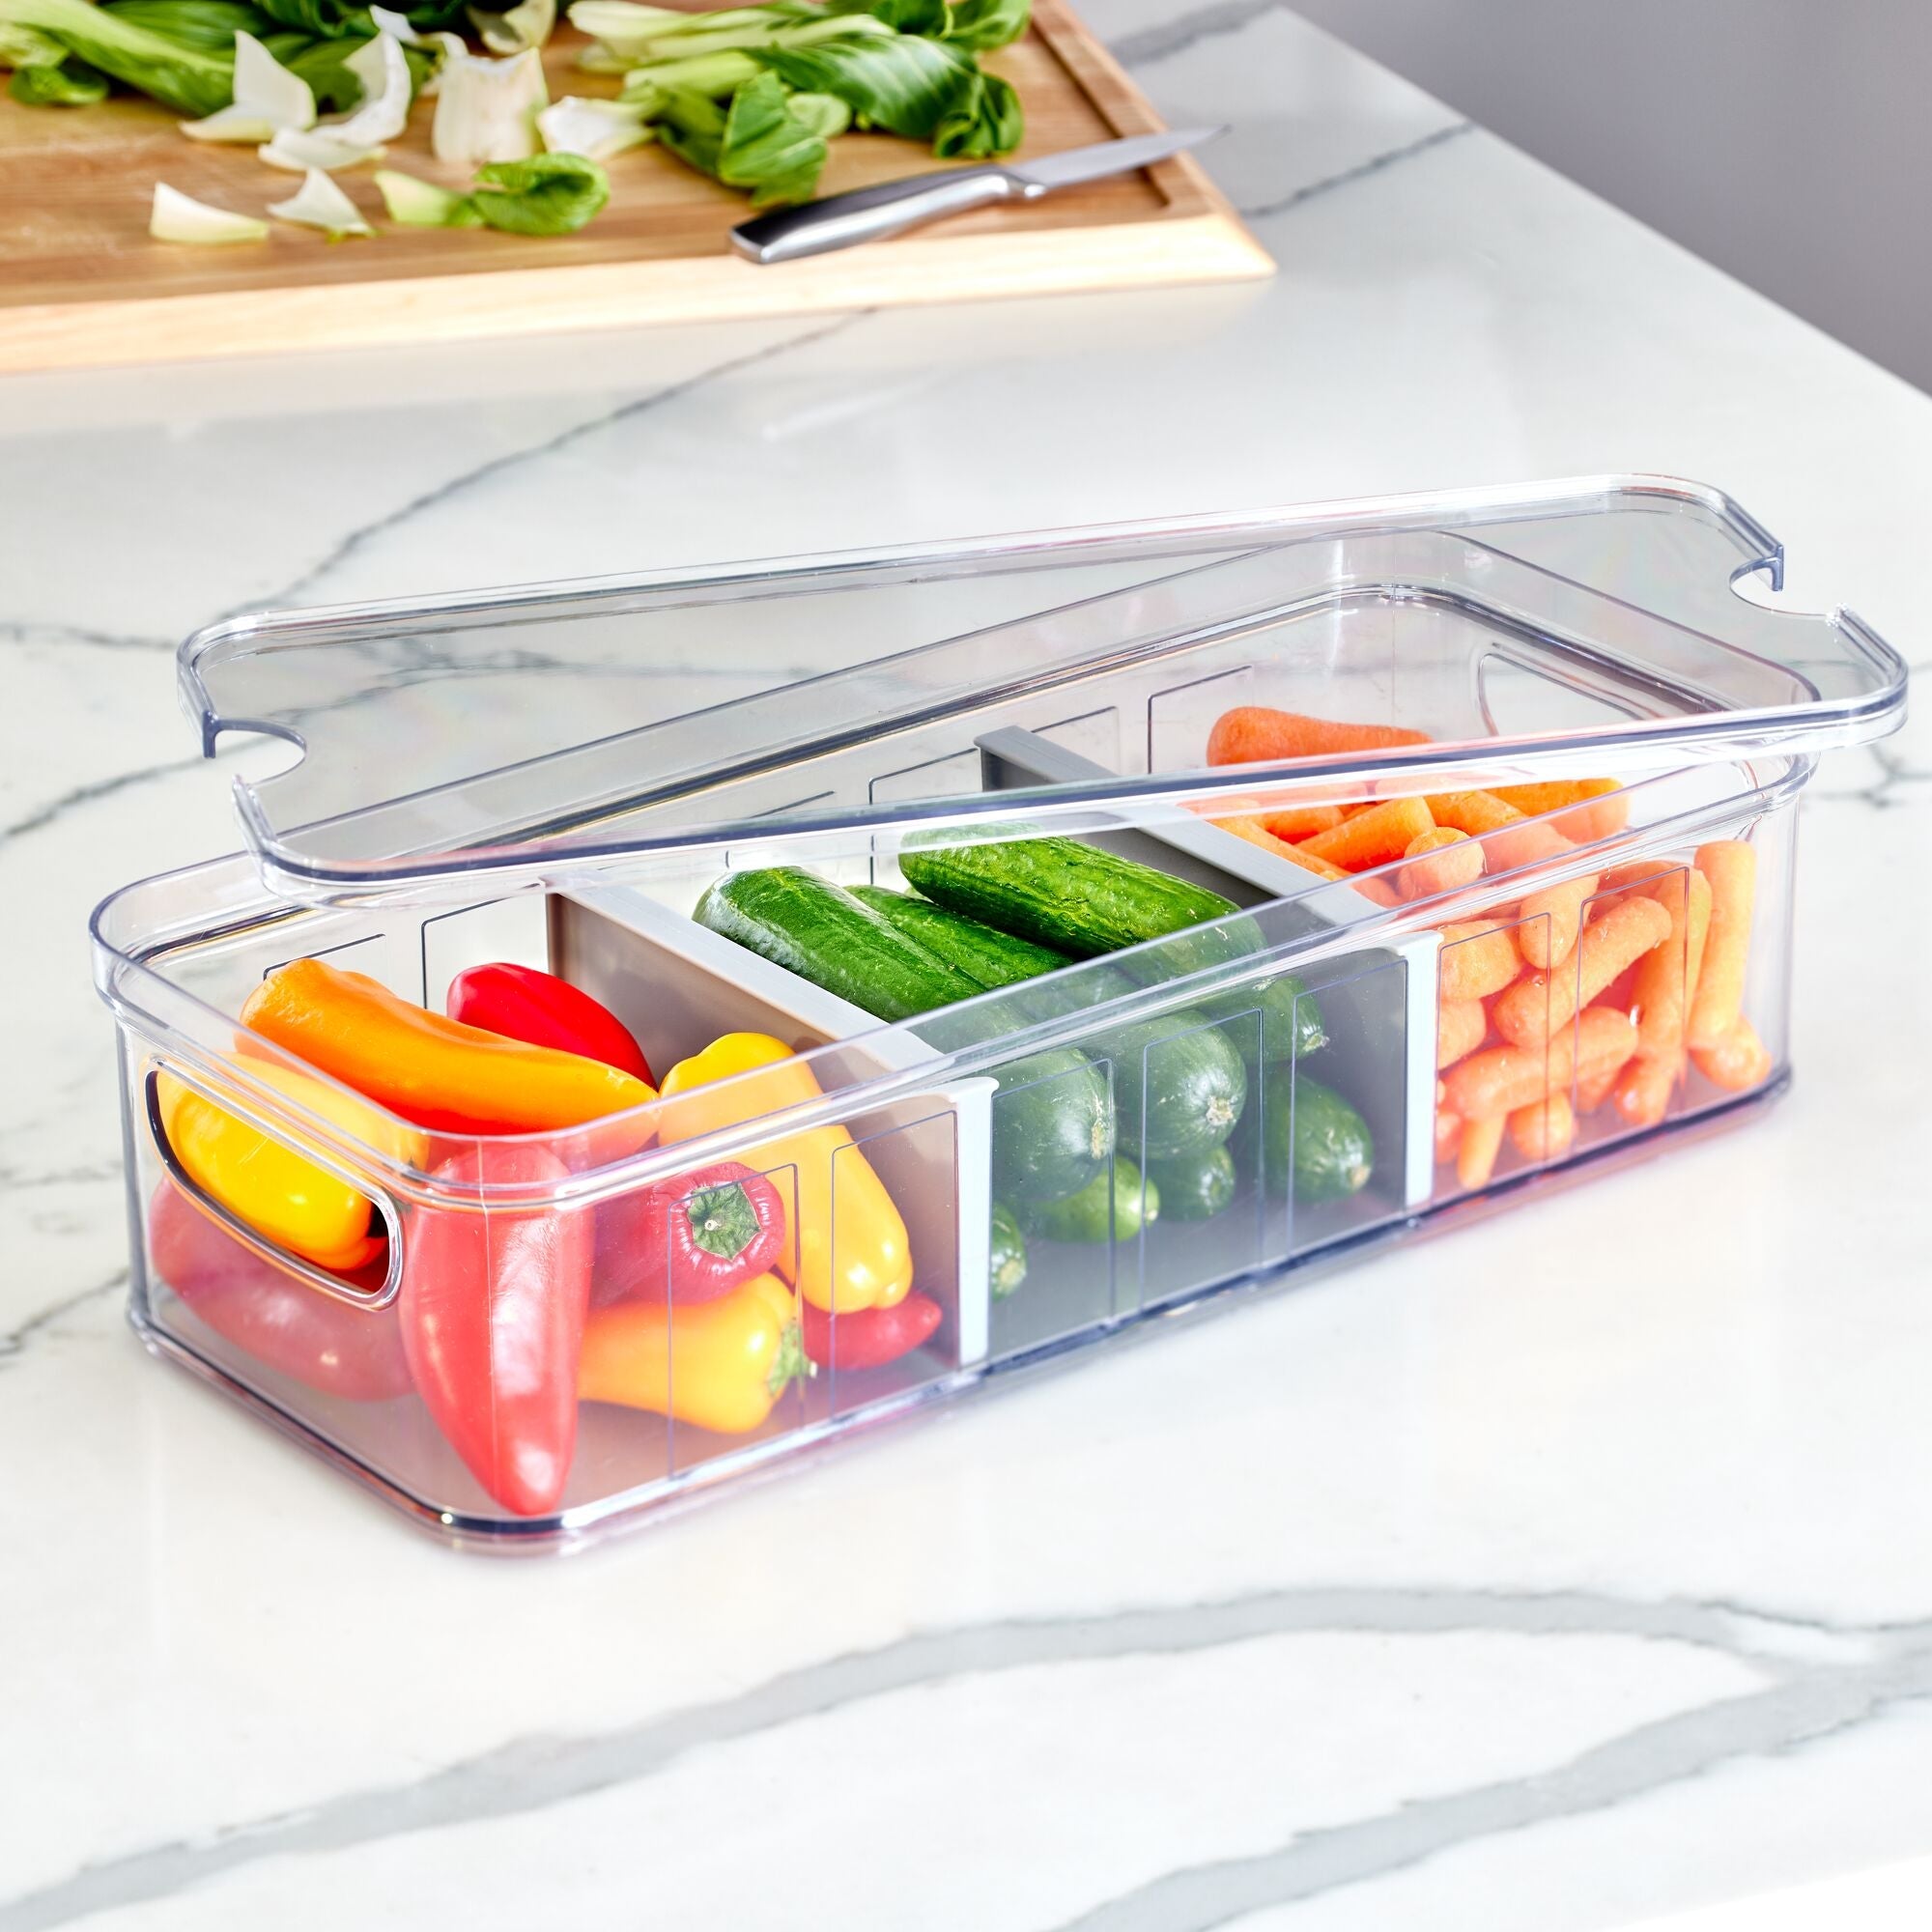 iDesign Crisp Stackable Refrigerator and Pantry Produce Food